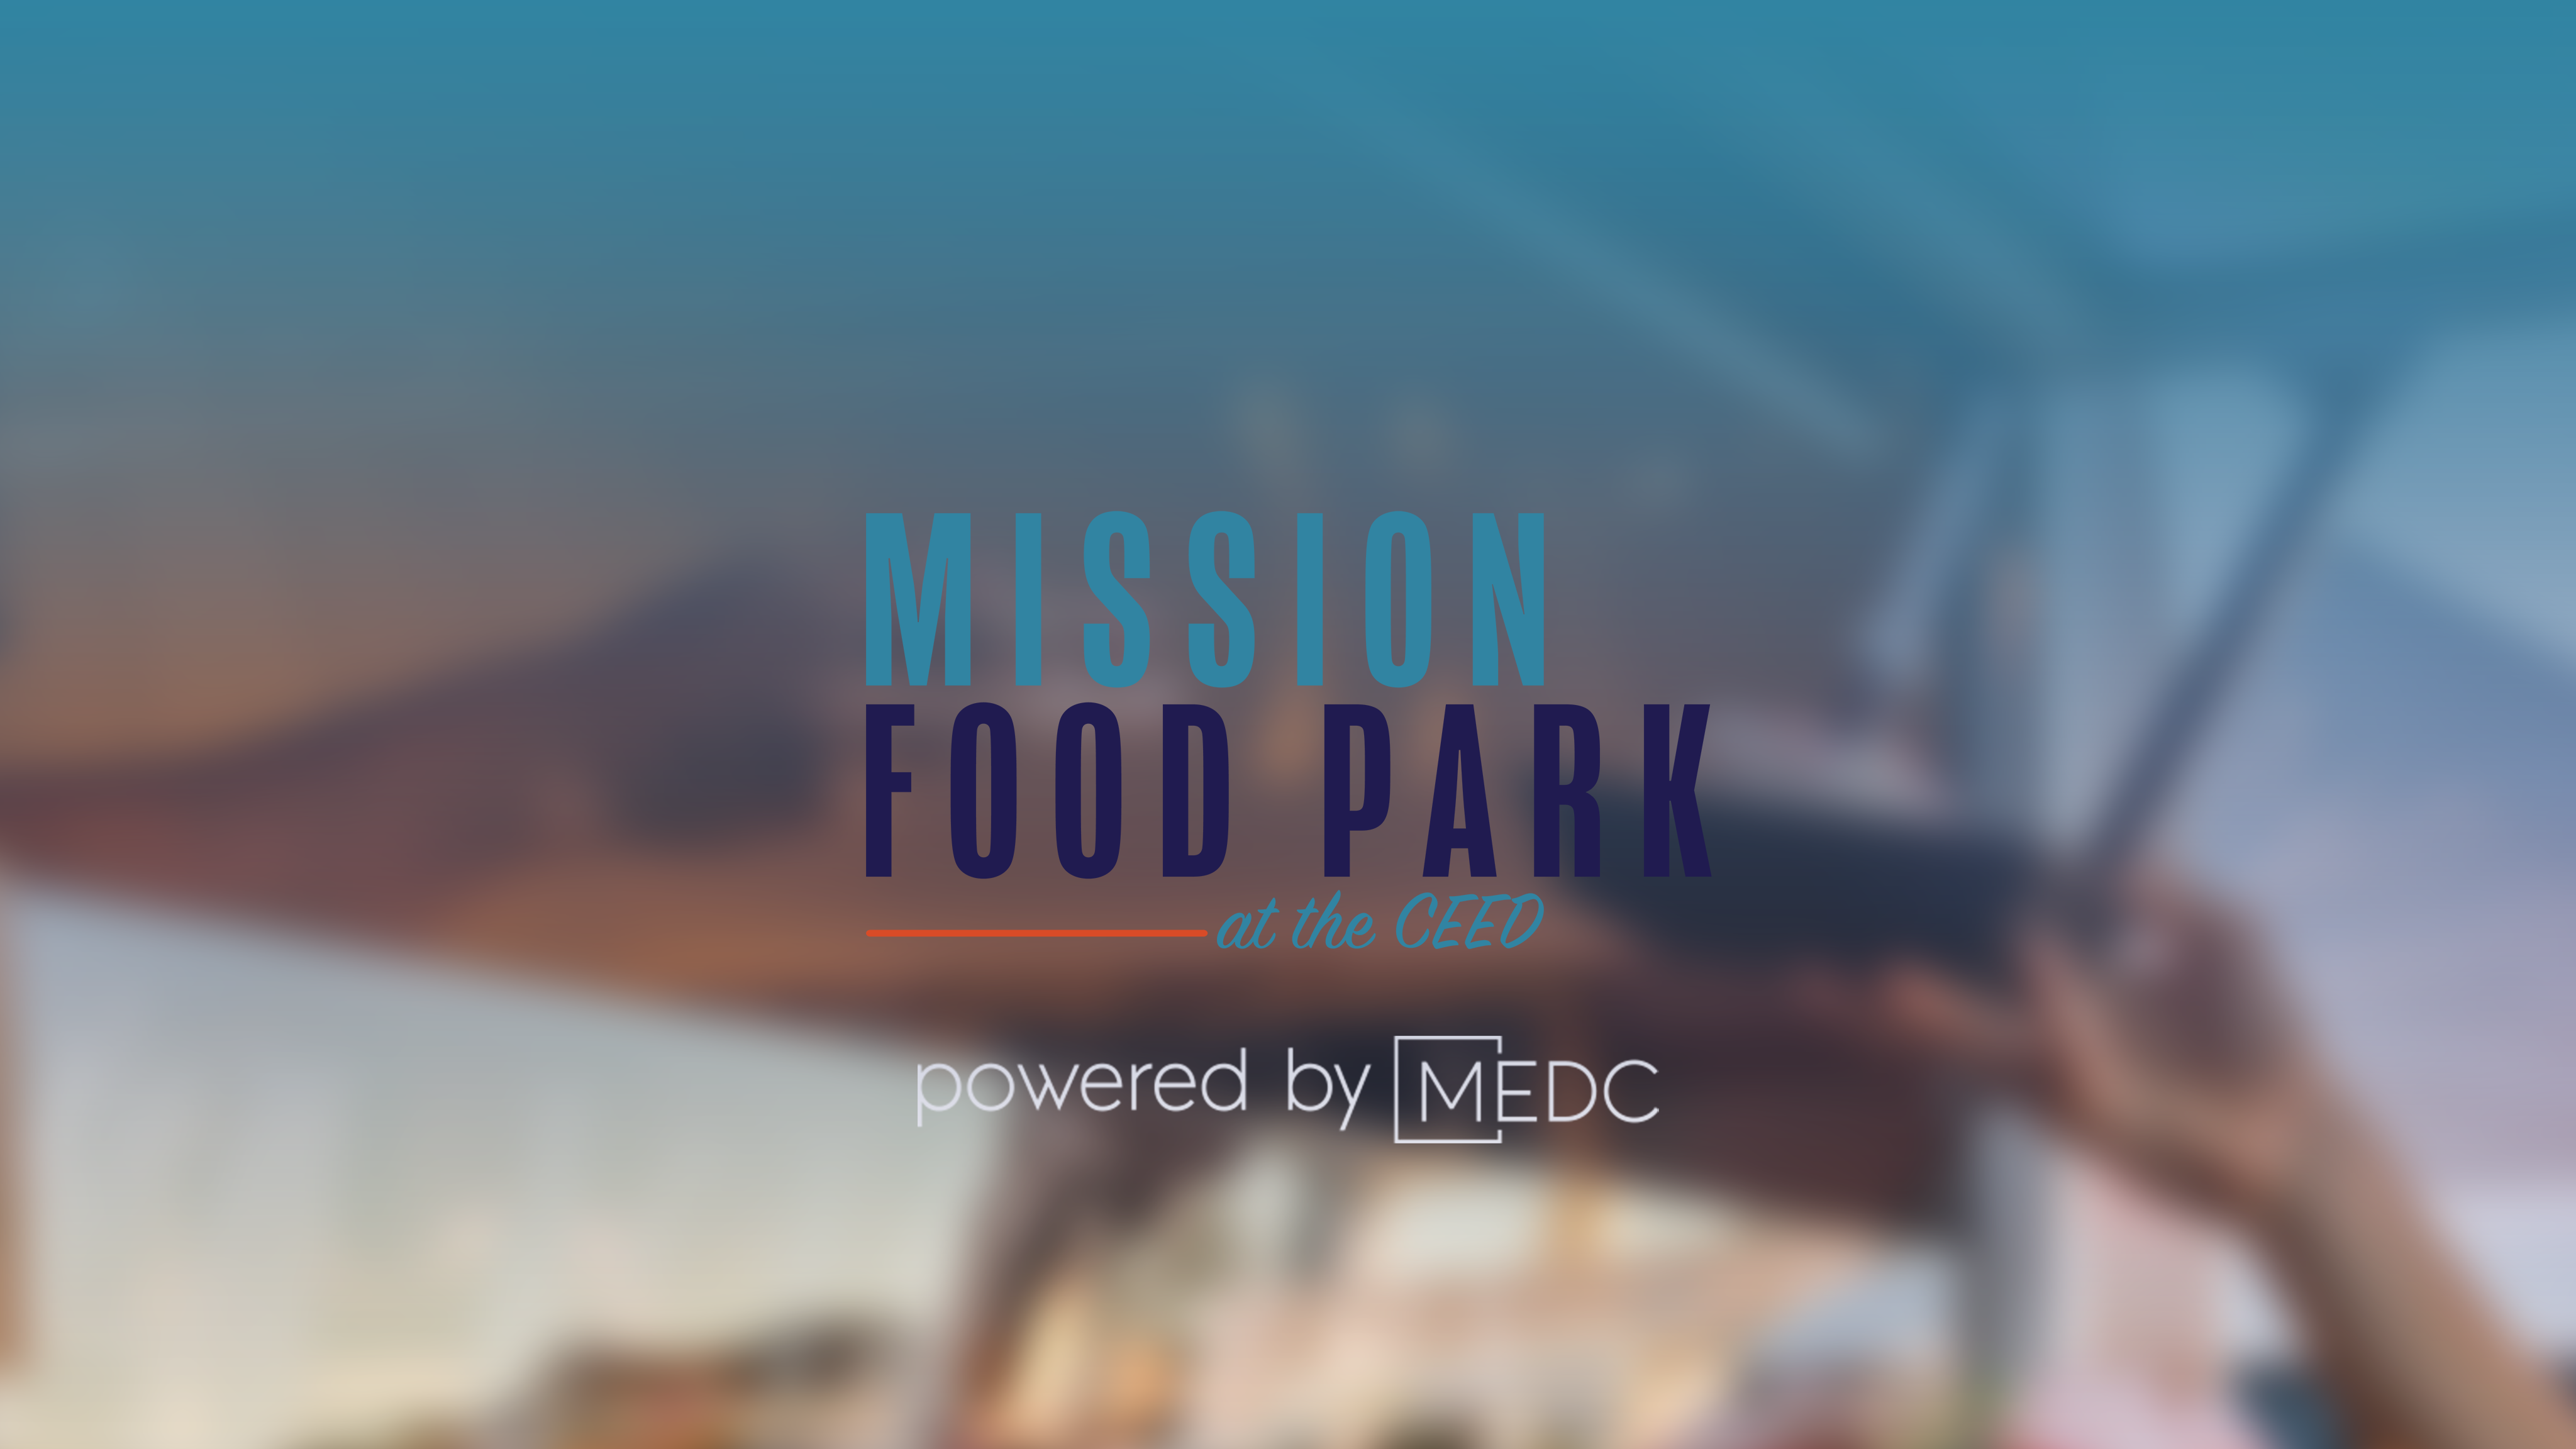 MISSION FOOD PARK AT CEED ANNOUNCES GRAND OPENING